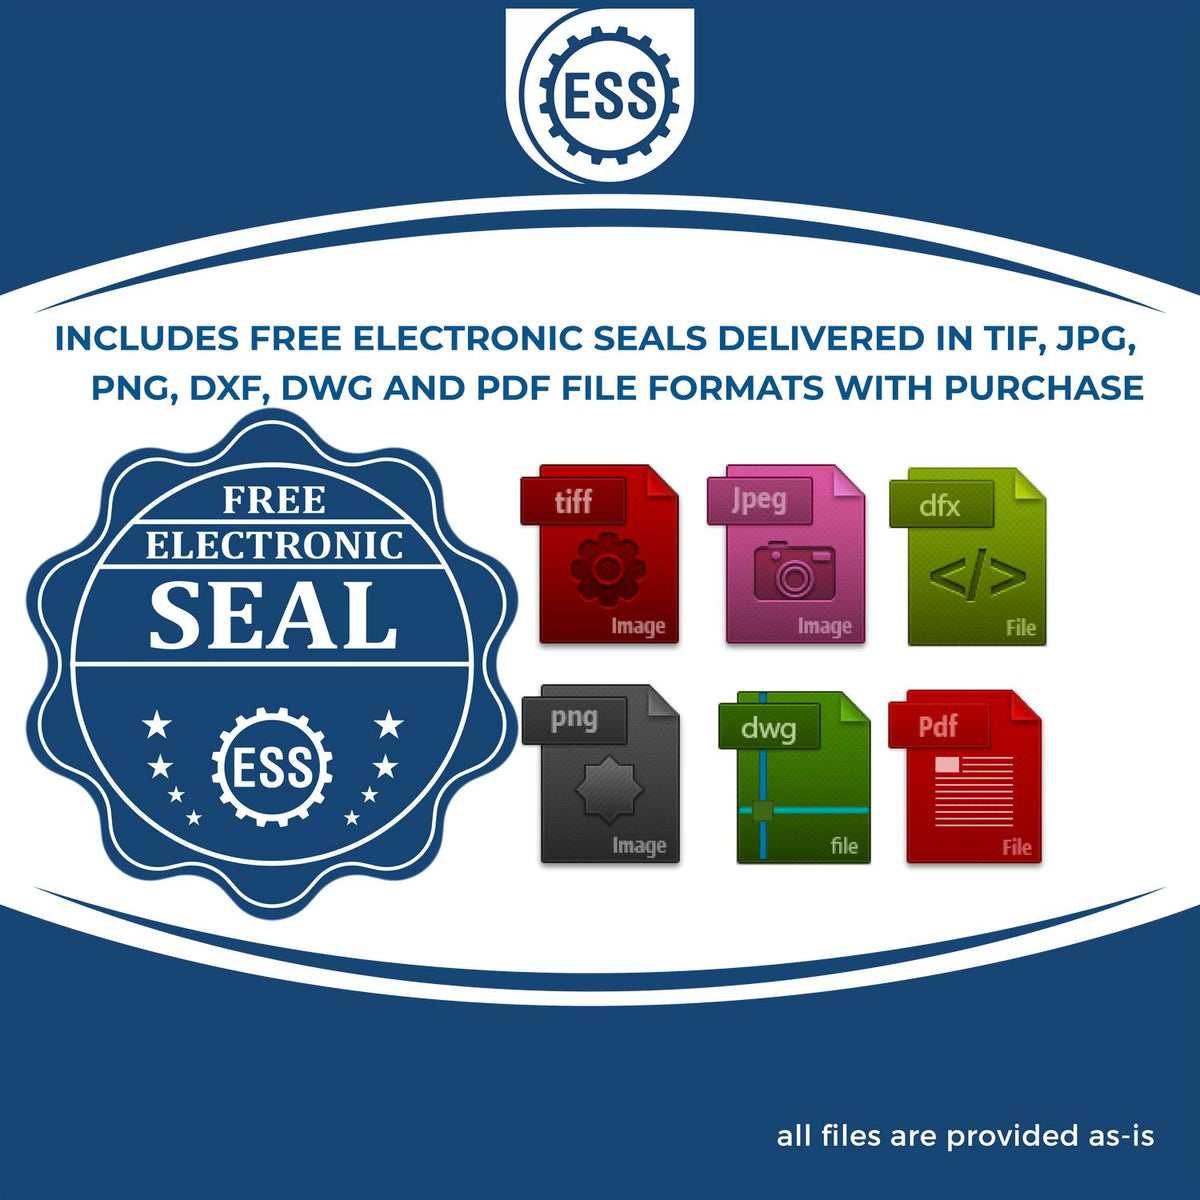 An infographic for the free electronic seal for the Soft South Carolina Professional Geologist Seal illustrating the different file type icons such as DXF, DWG, TIF, JPG and PNG.